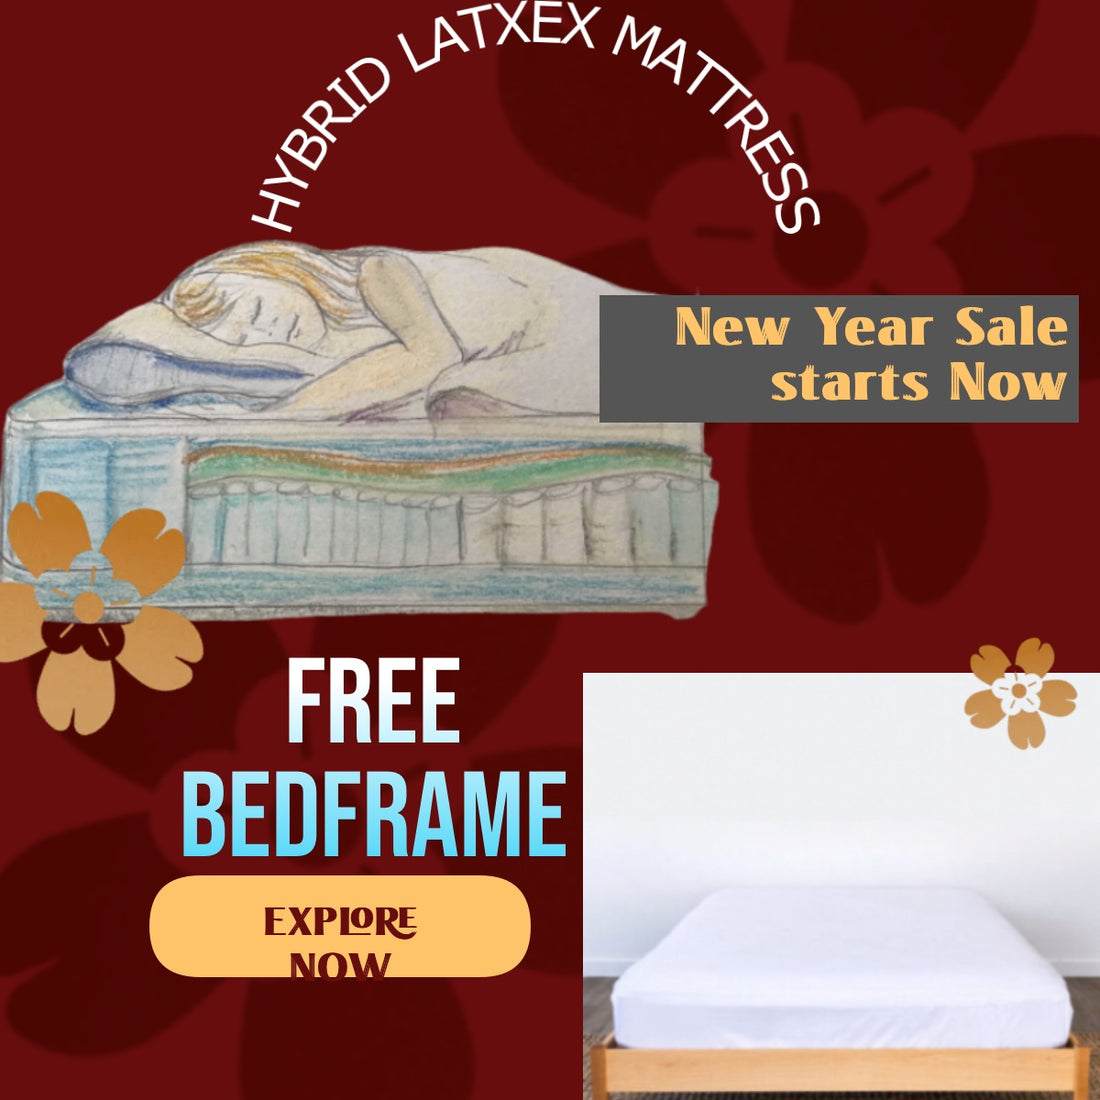 advantages of purchasing a latex mattress from a store that Designs it's beds